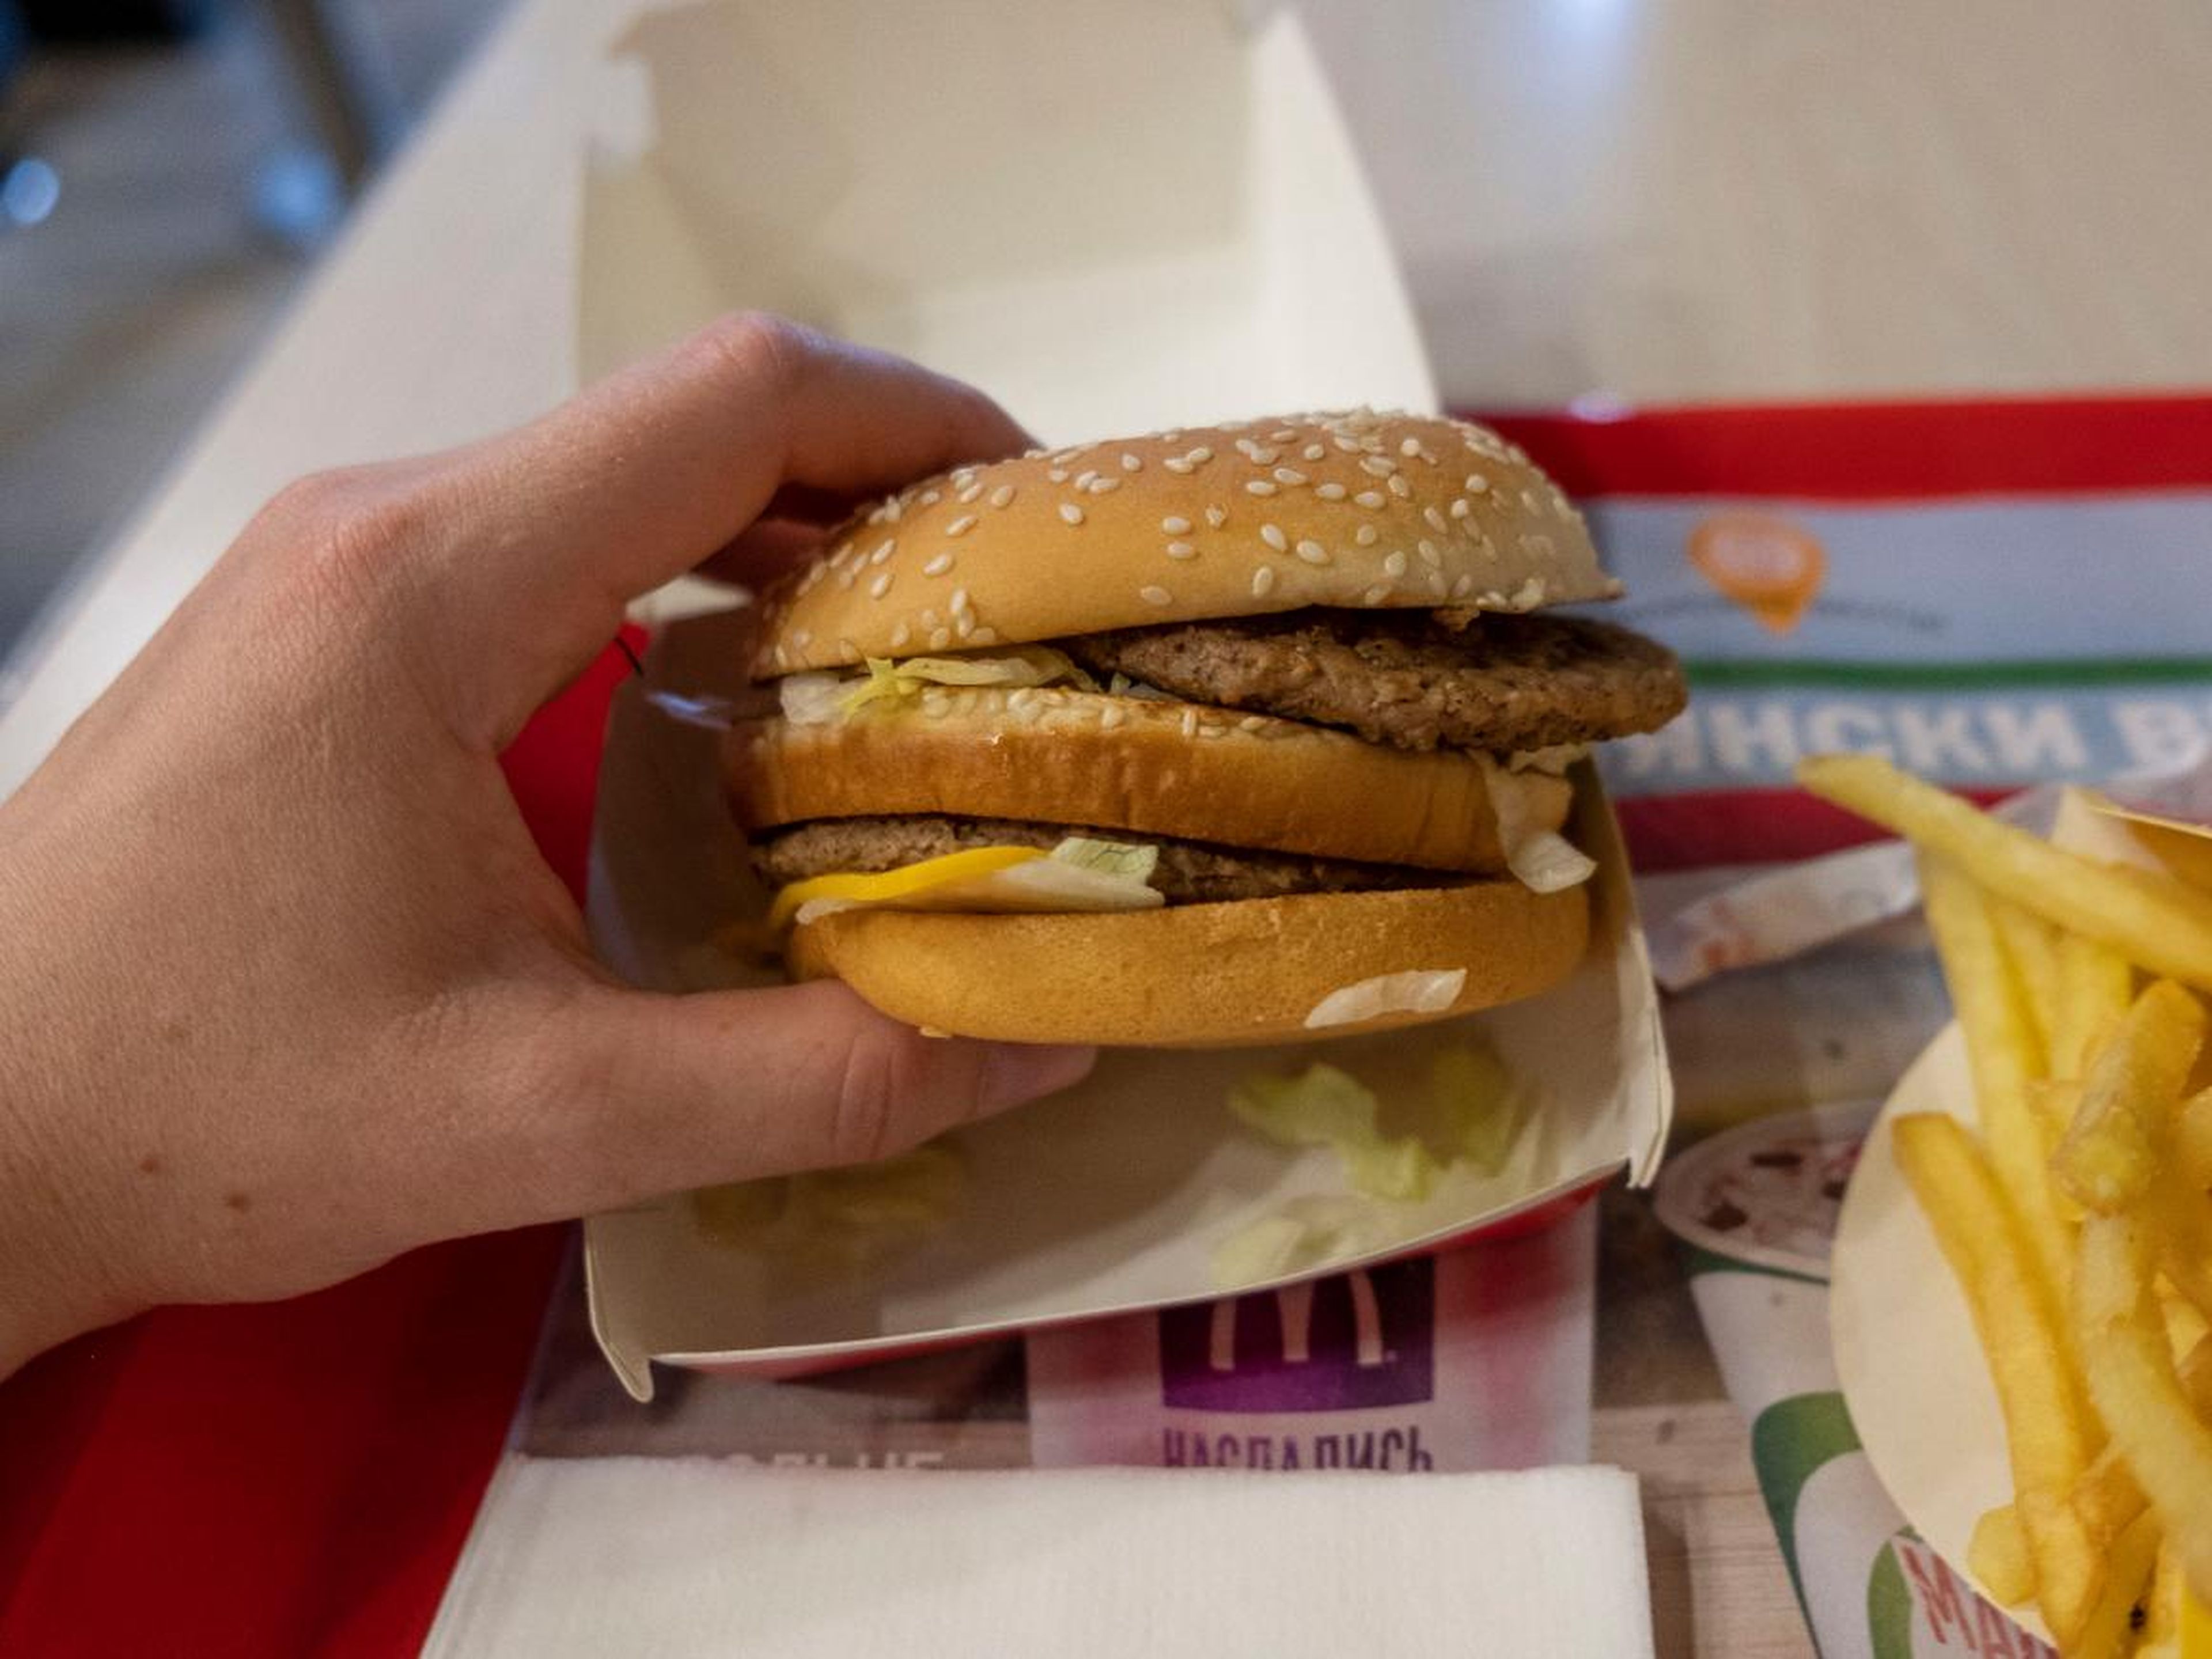 I wasn't too impressed by the look of the Big Mac when I first opened it.